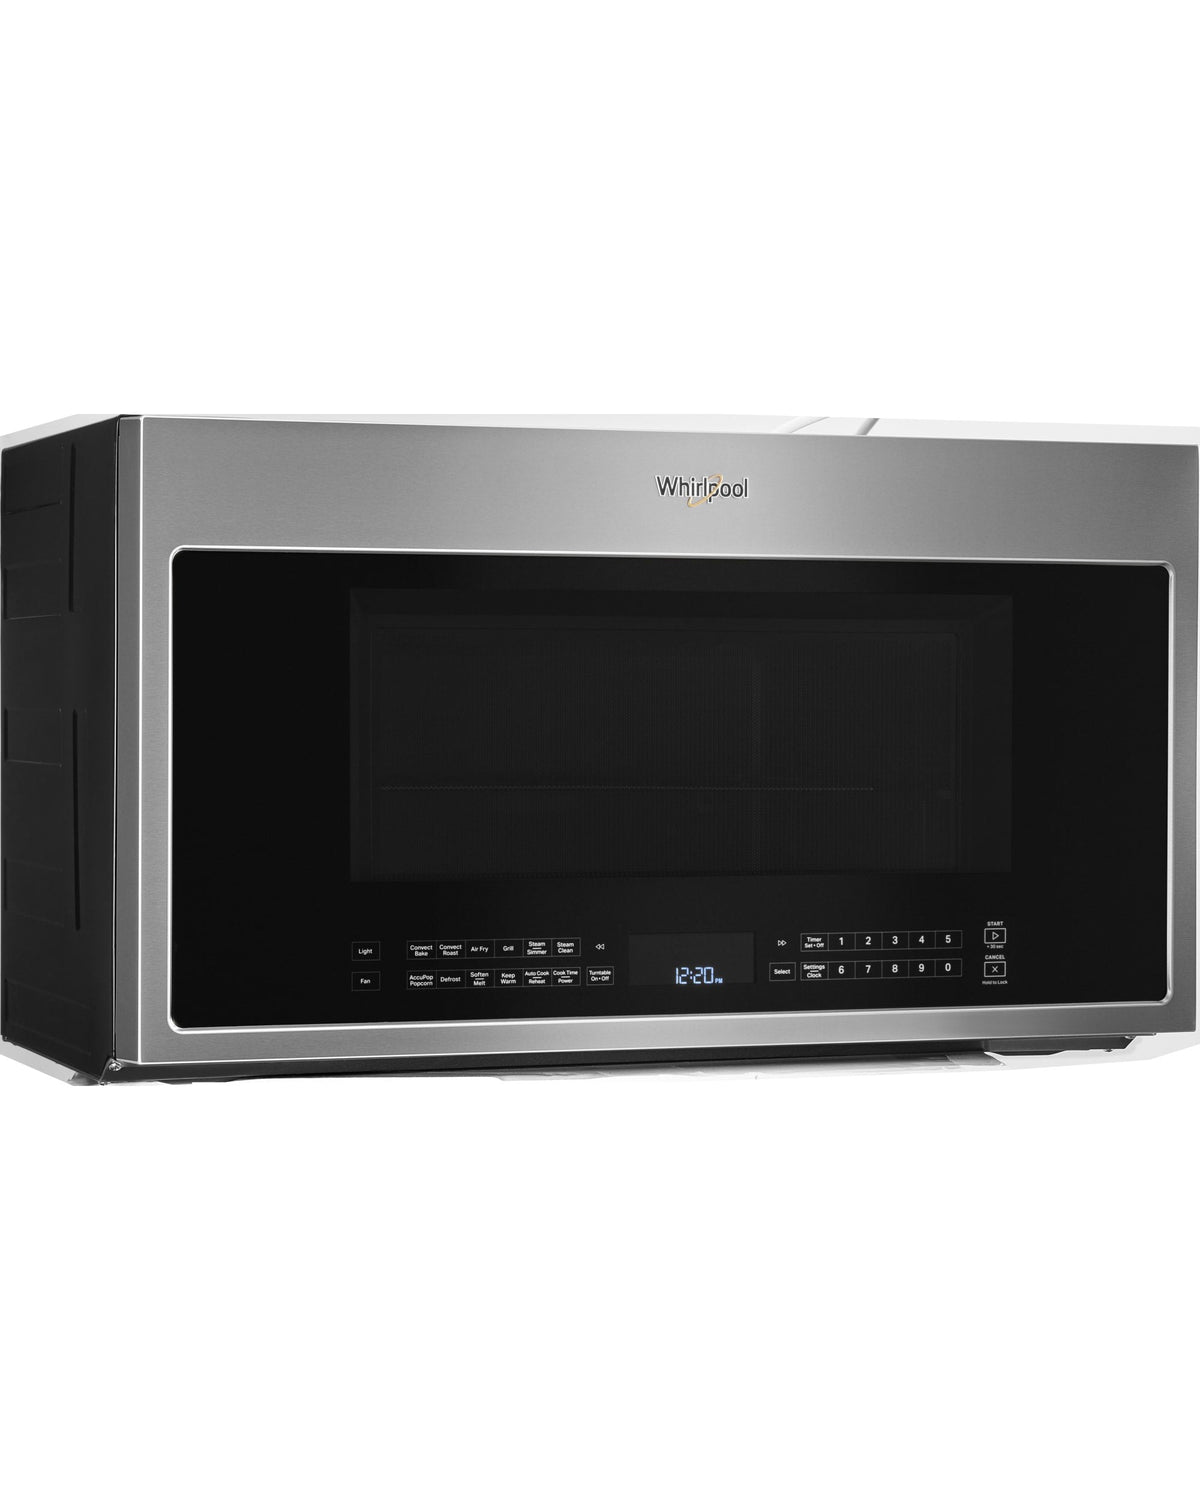 WHIRLPOOL WMH78519LZ 1.9 Cu. Ft. Microwave with Air Fry Mode